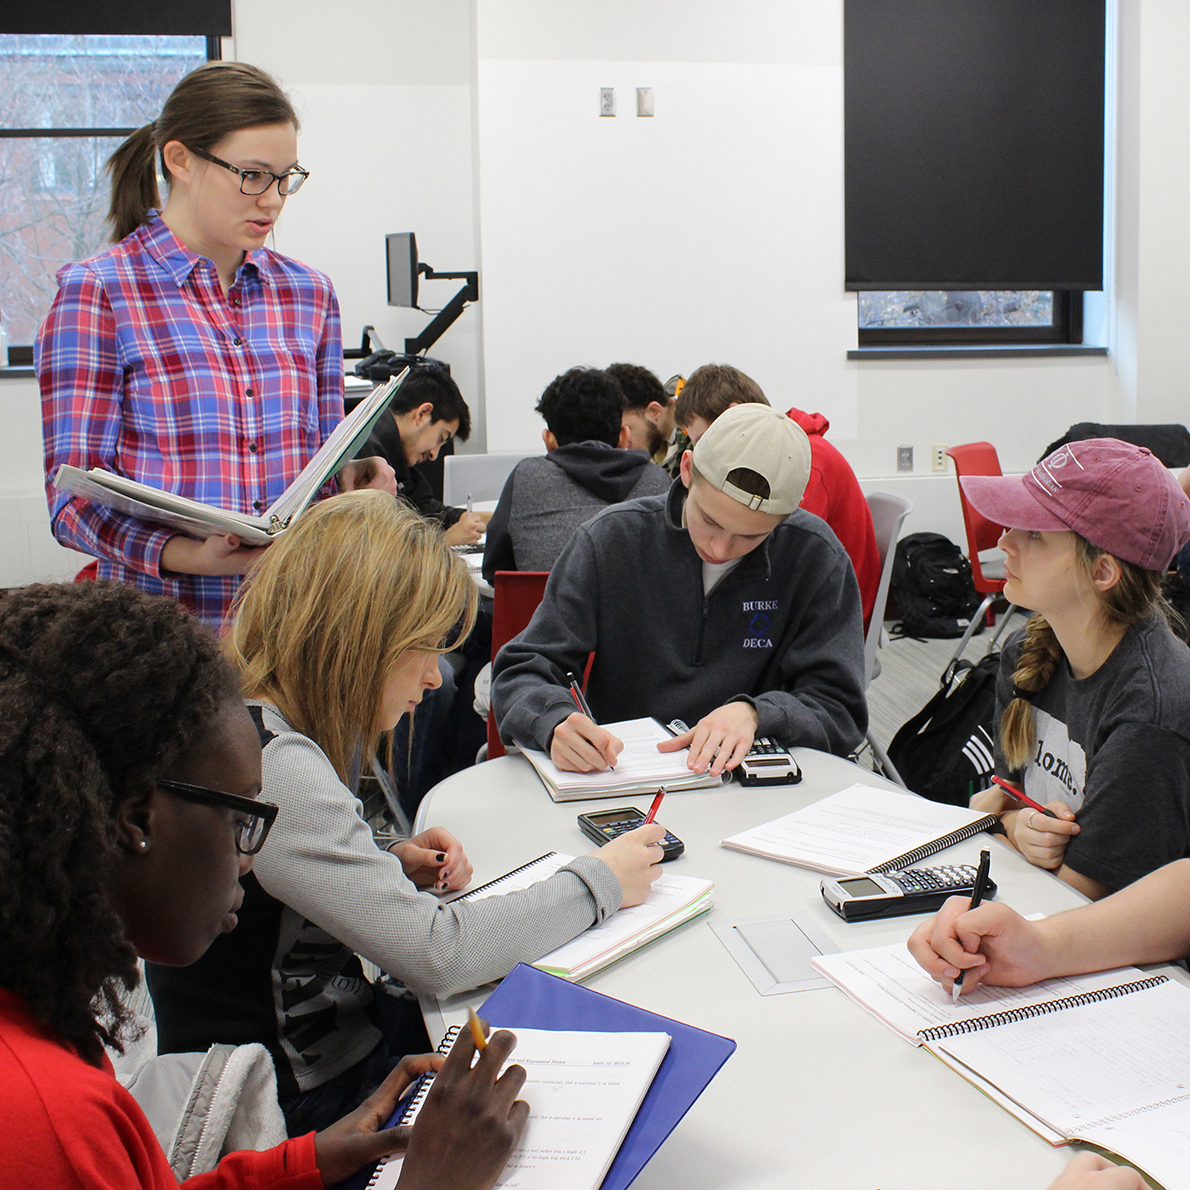 Undergraduate learning assistant Meredith Hovis (left), a secondary mathematics (6-12) major, facilitates group discussions with students in a Math 101 course